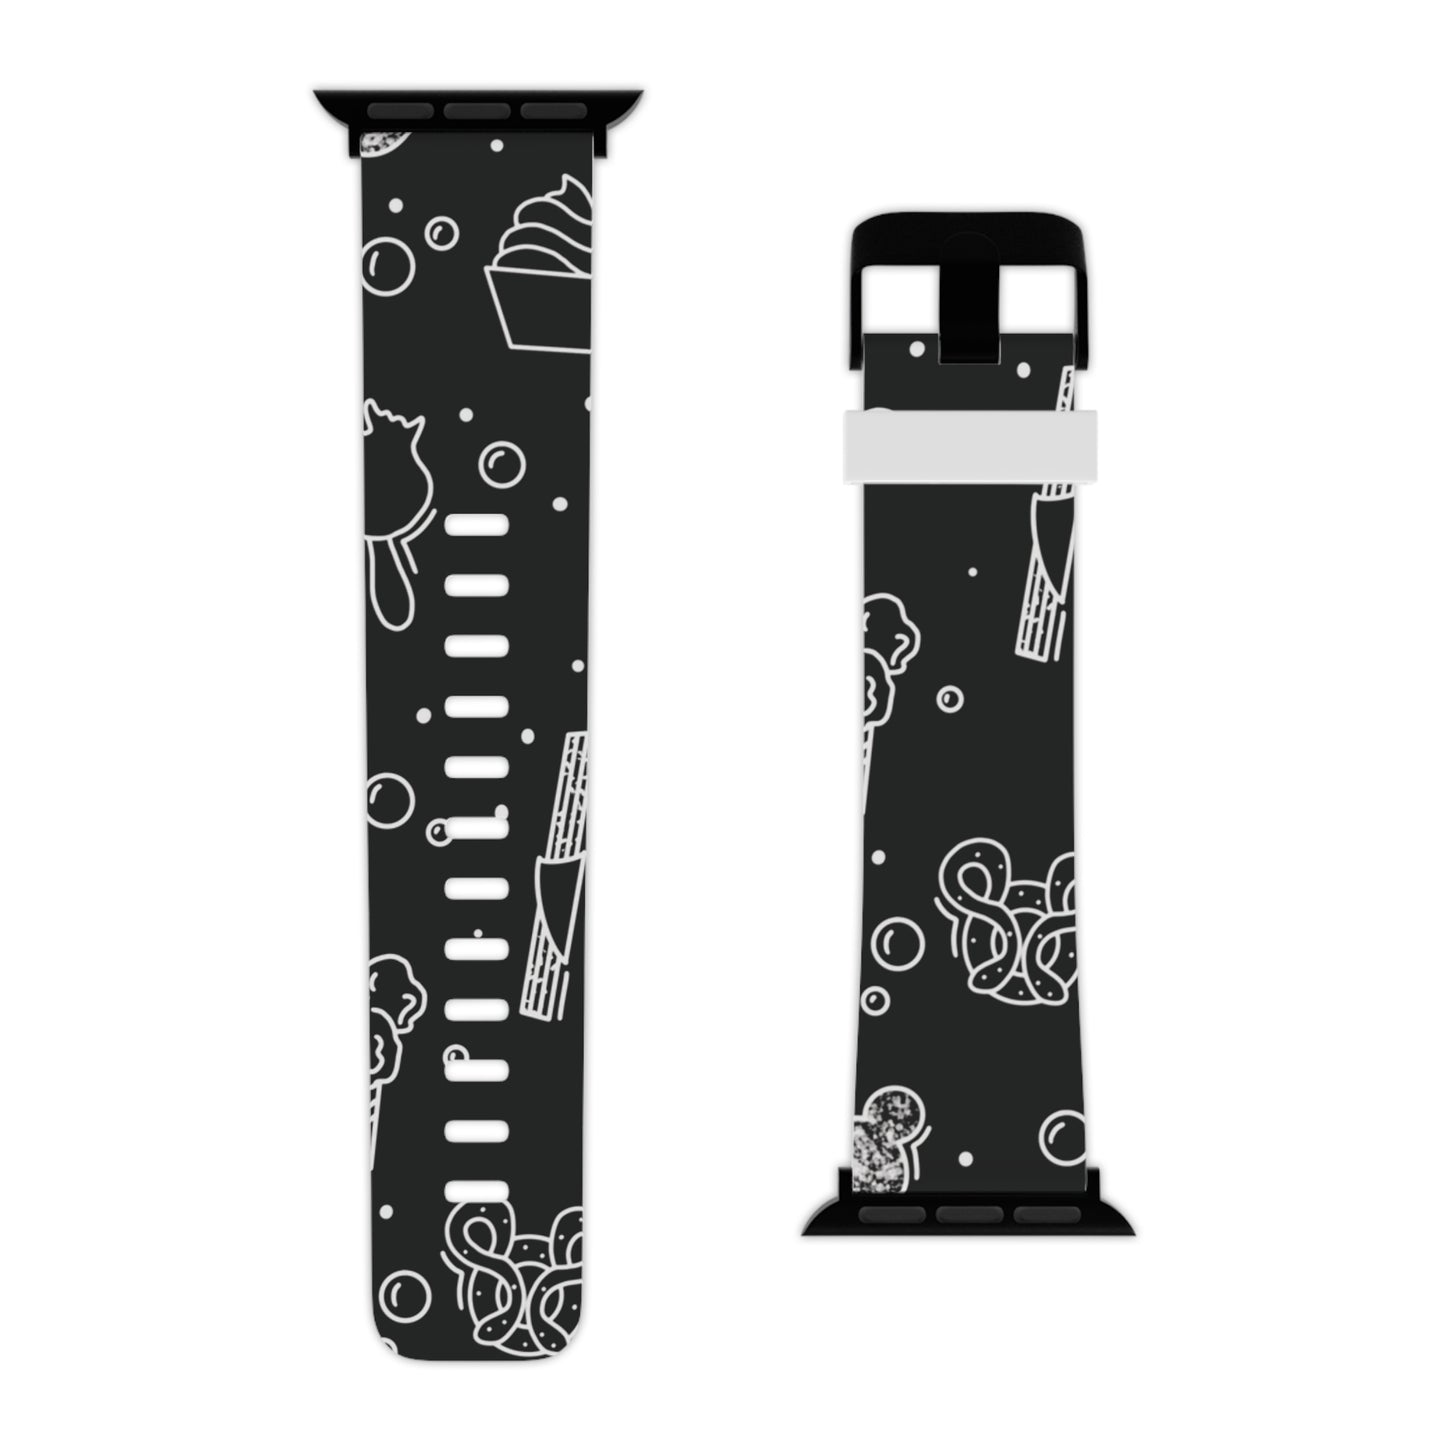 Snacks - black - Watch Band for Apple Watch